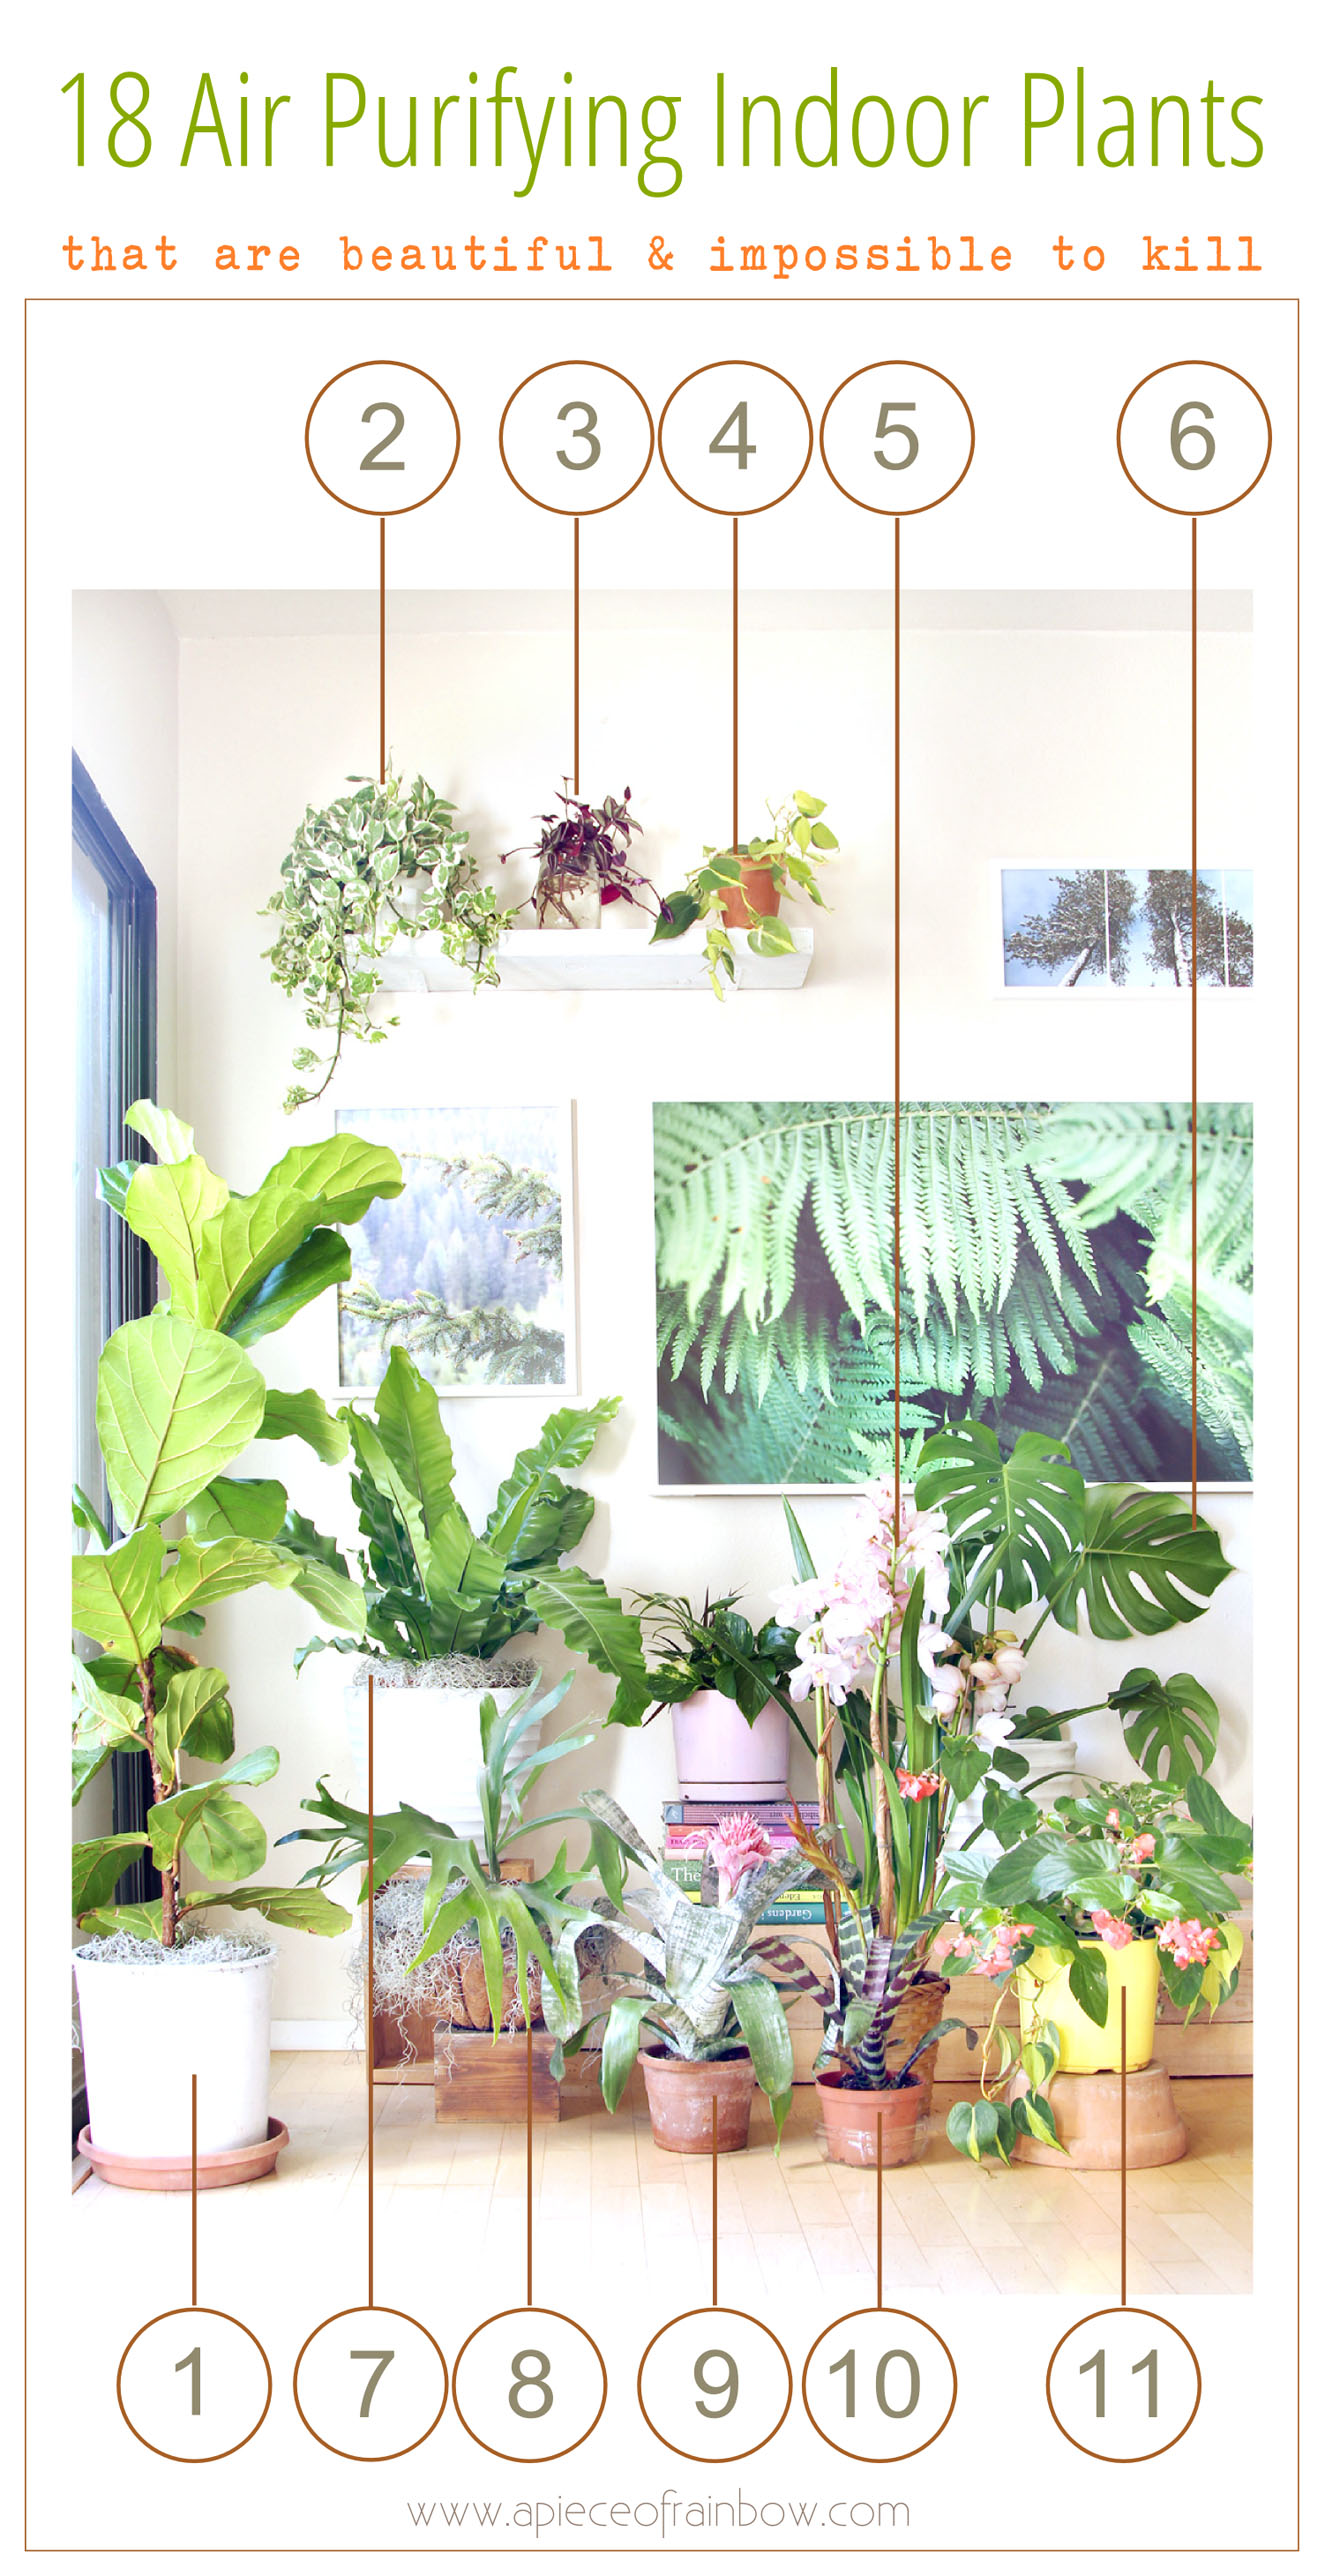 Check out our gorgeous indoor garden with 18 best indoor plants! Plus 5 essential tips on how to grow healthy house plants! Make your home more beautiful with these showy foliage and flowering plants that thrive in low light conditions, and are so easy to grow! - A Piece of Rainbow